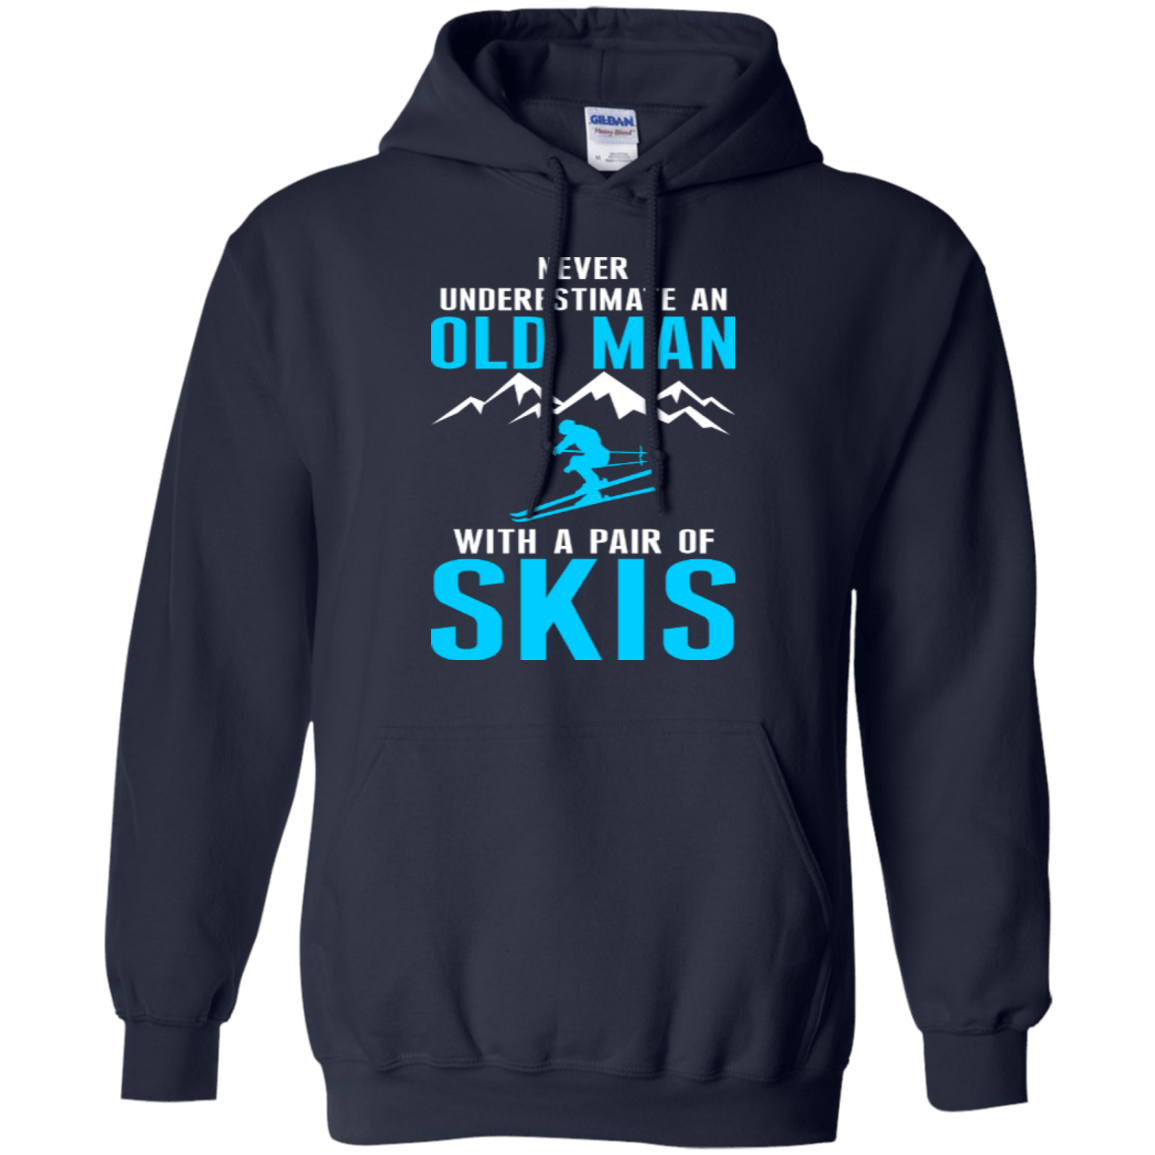 Never Underestimate An Old Man With A Pair Of Skis Hoodies - Powderaddicts